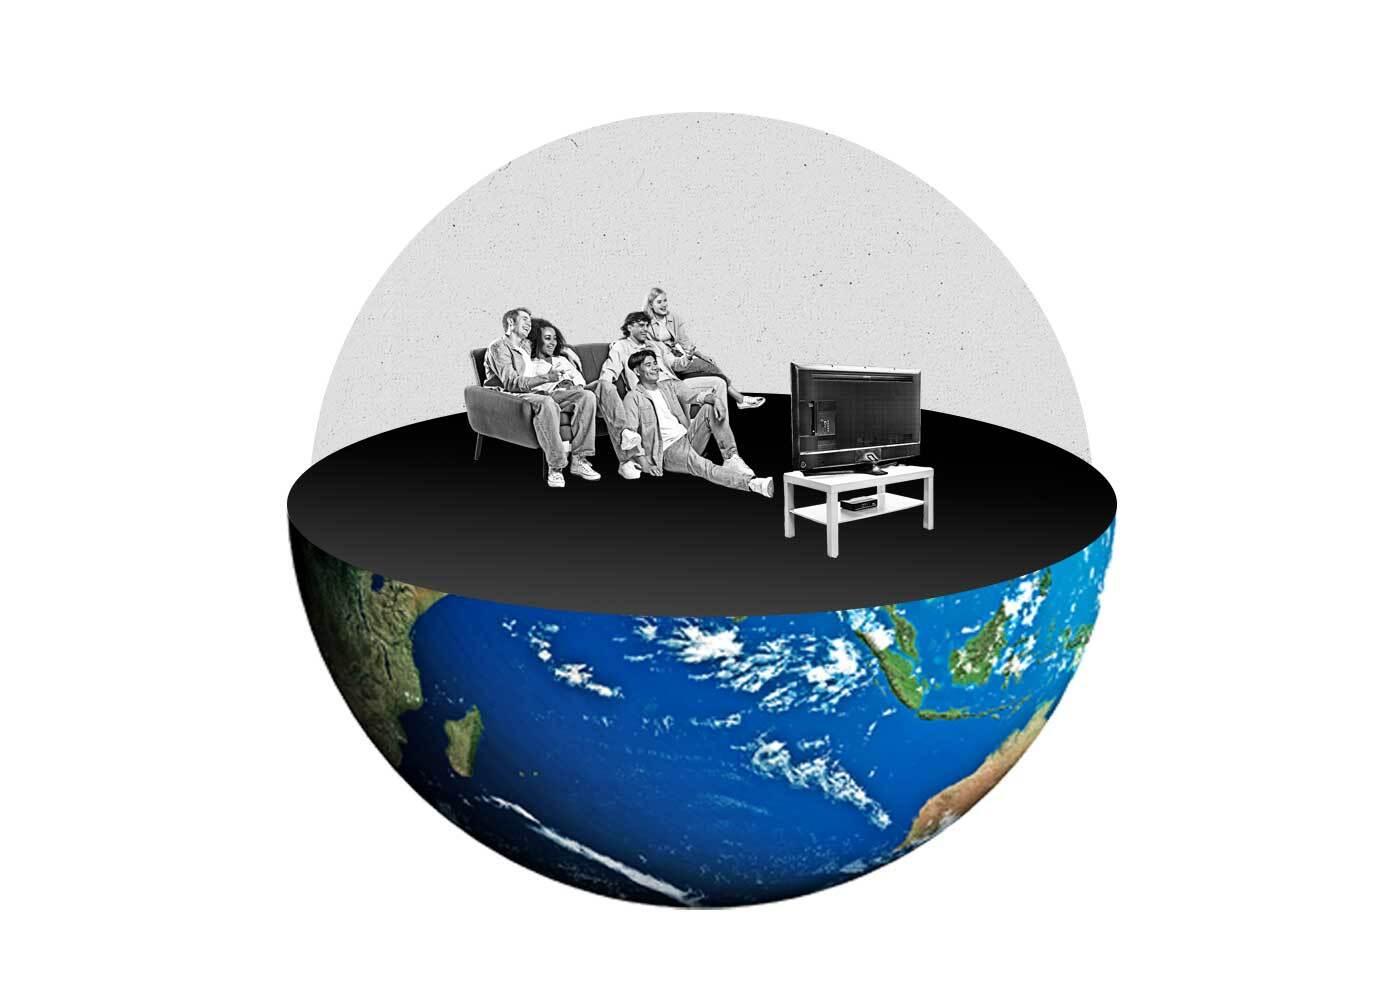 Globe split in half with people on a couch watching TV sitting on top of the globe.